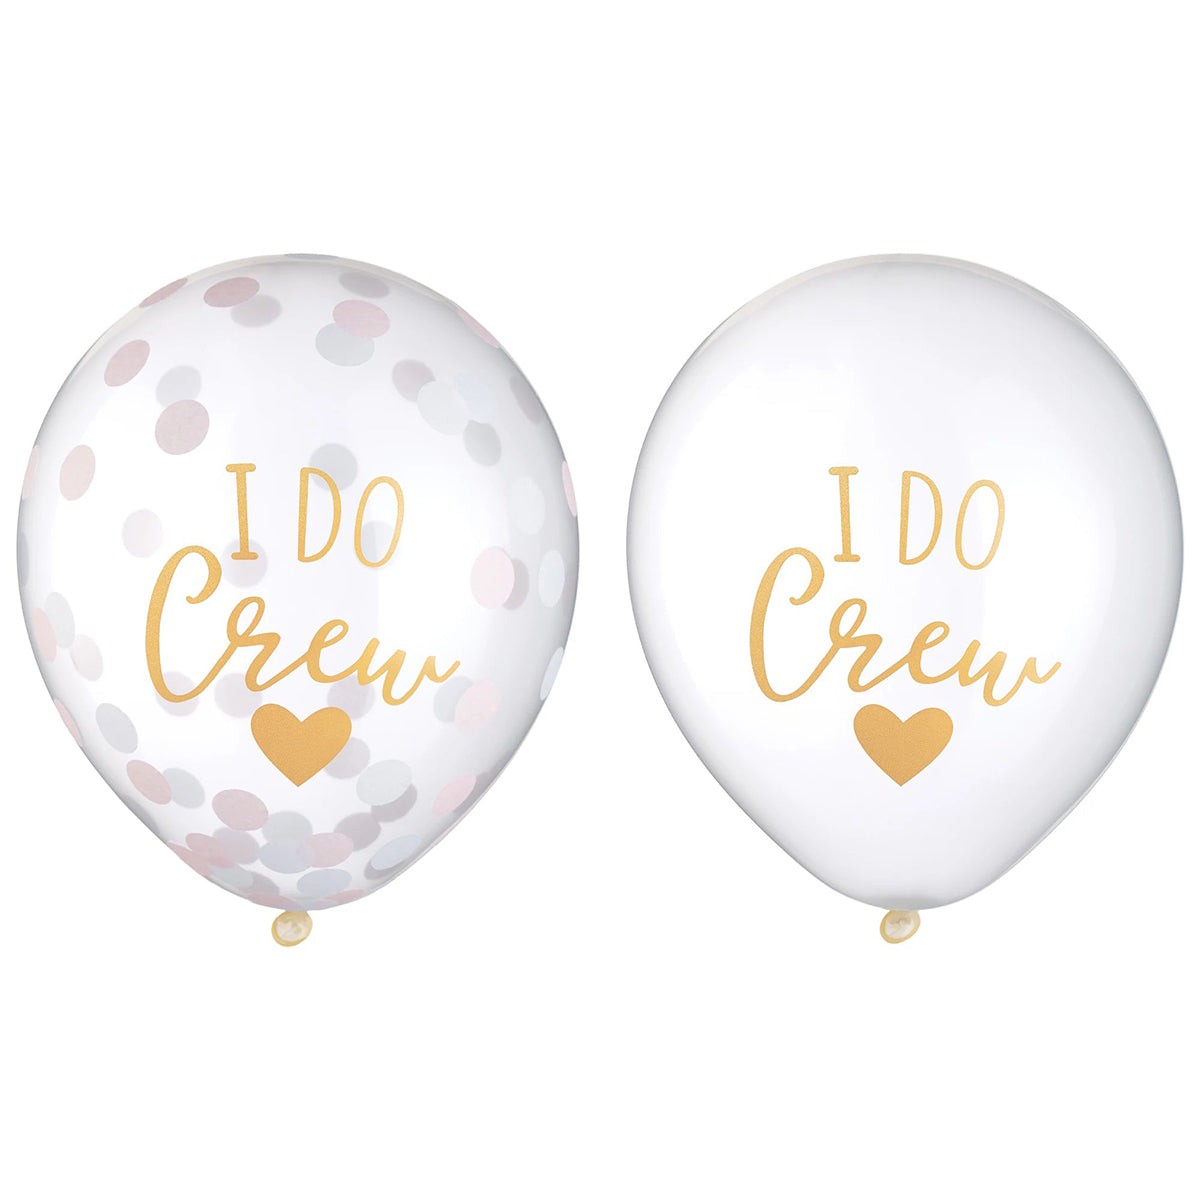 AMSCAN CA Bridal Shower Bridal Shower Iridescent White Confetti Latex Balloons, Luxurious Shower Collection, 12 Inches, 6 Count 192937325179